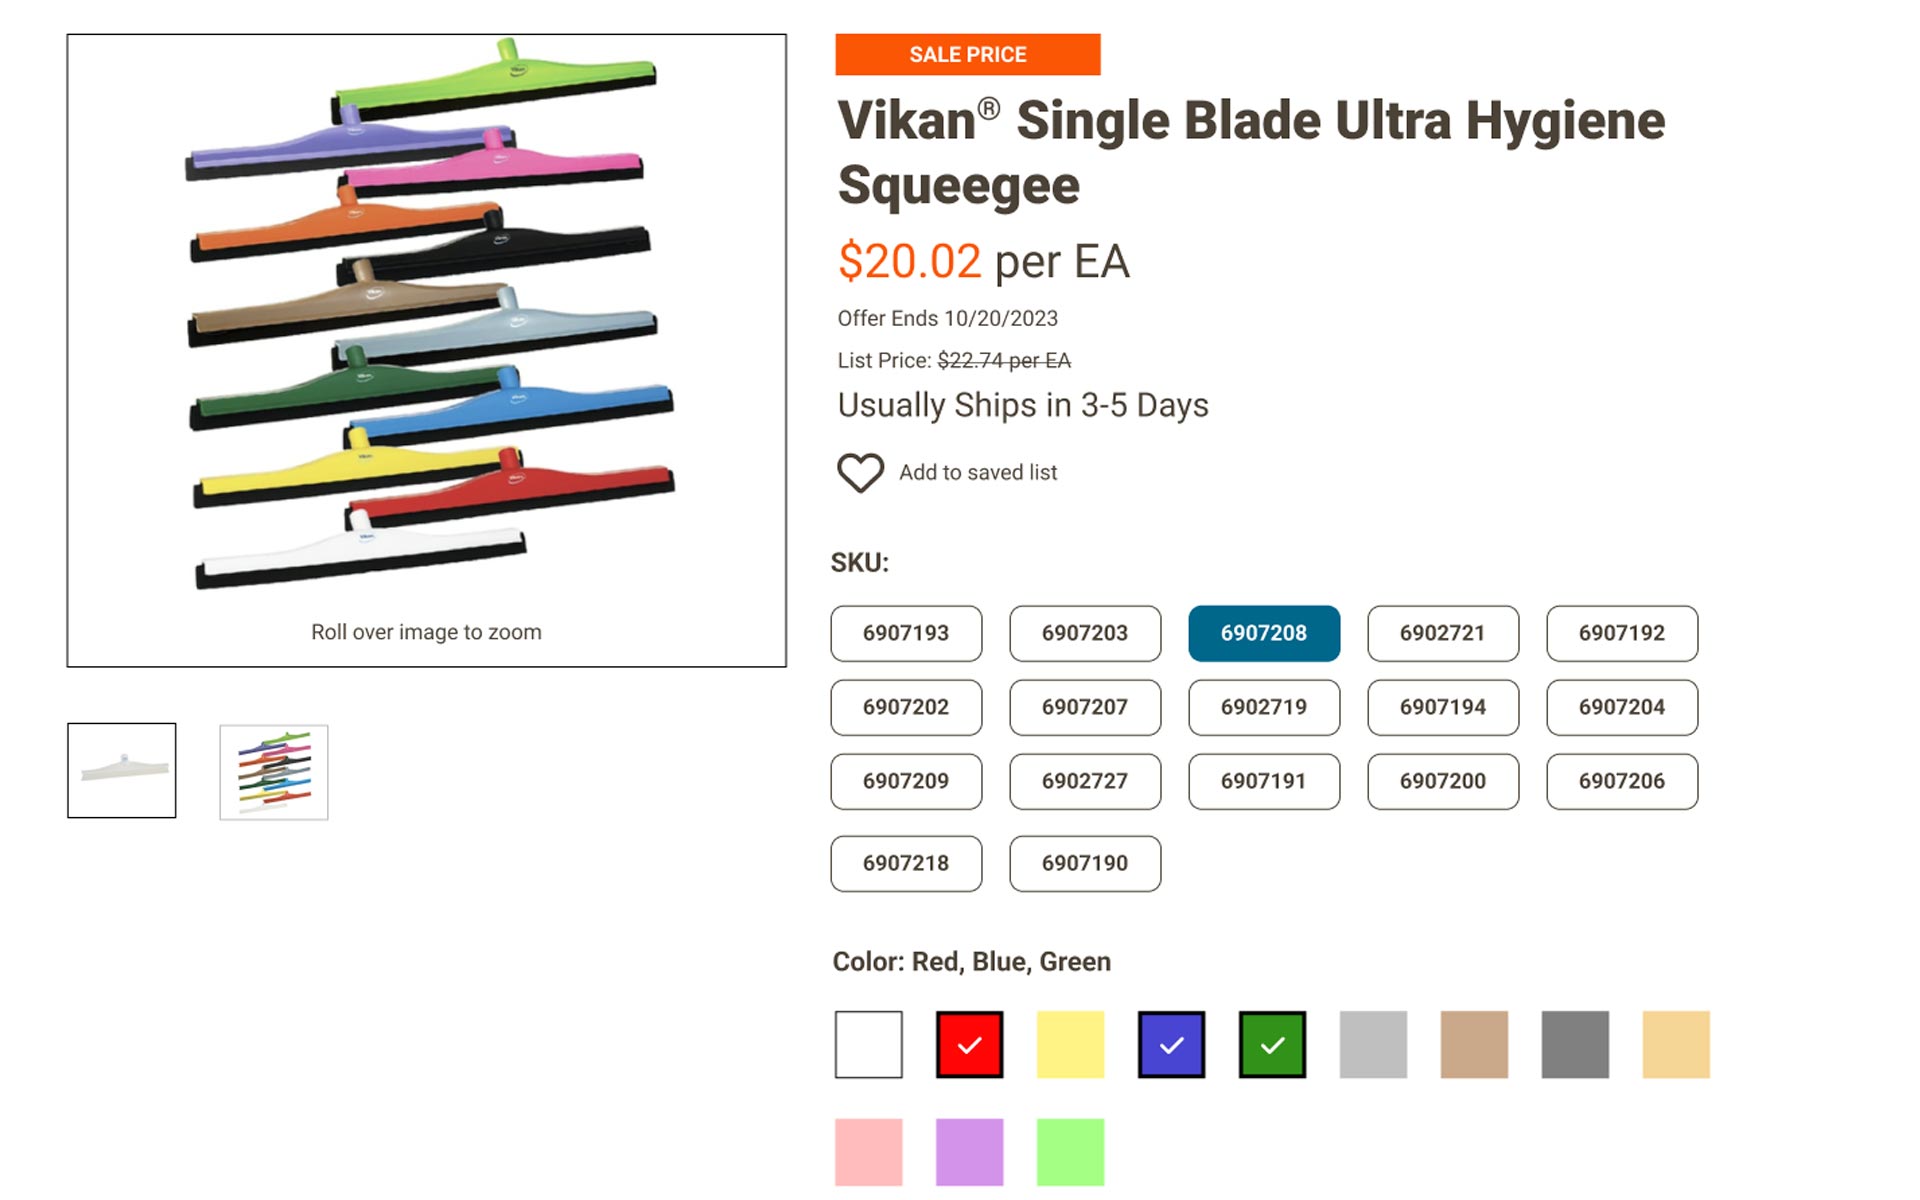 Vikan Single Blade Ultra Hygiene Squeegee products details wtih price, skus, colors, and shipping details